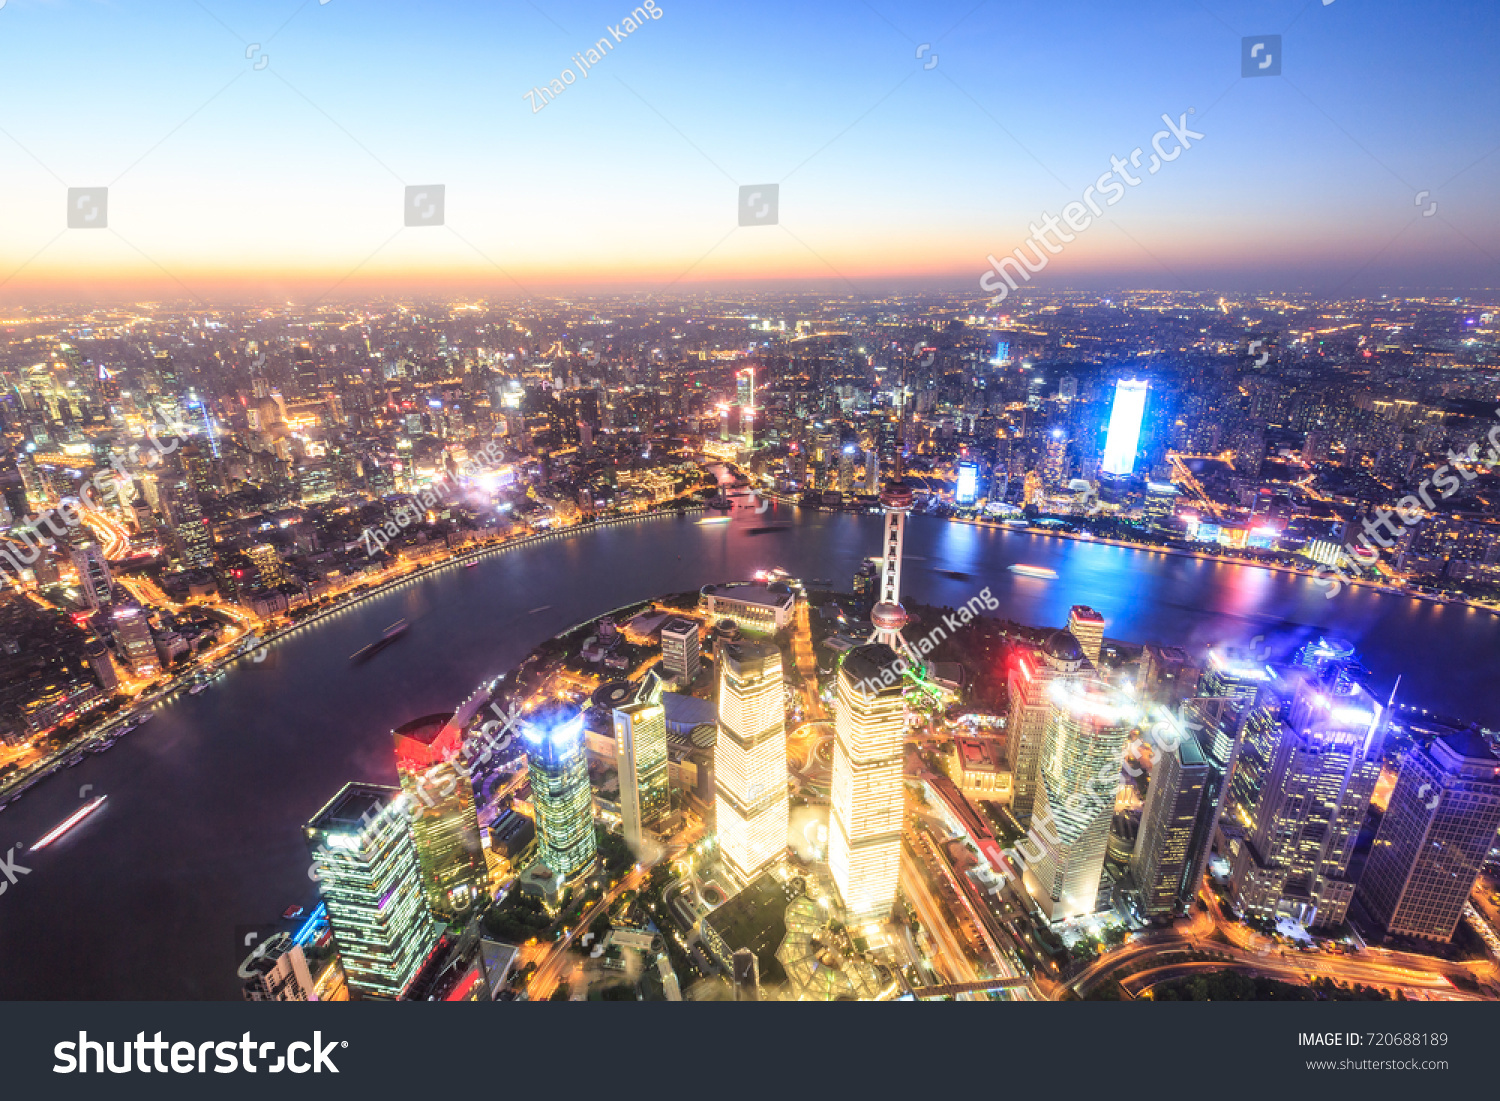 Shanghai huangpu river and pudong financial district skyline at sunset,China #720688189